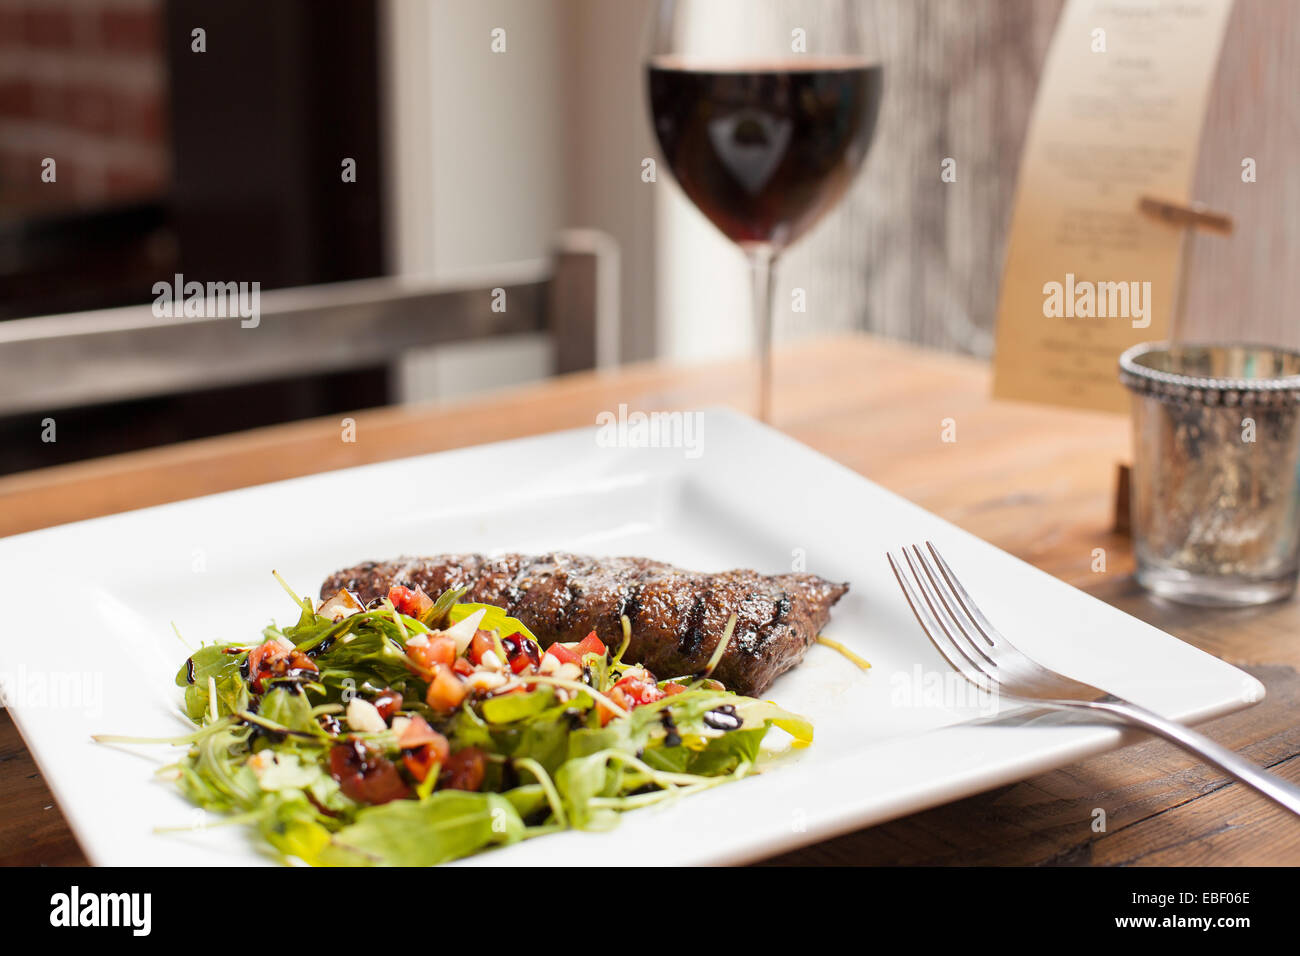 grilled steak with red wine Stock Photo